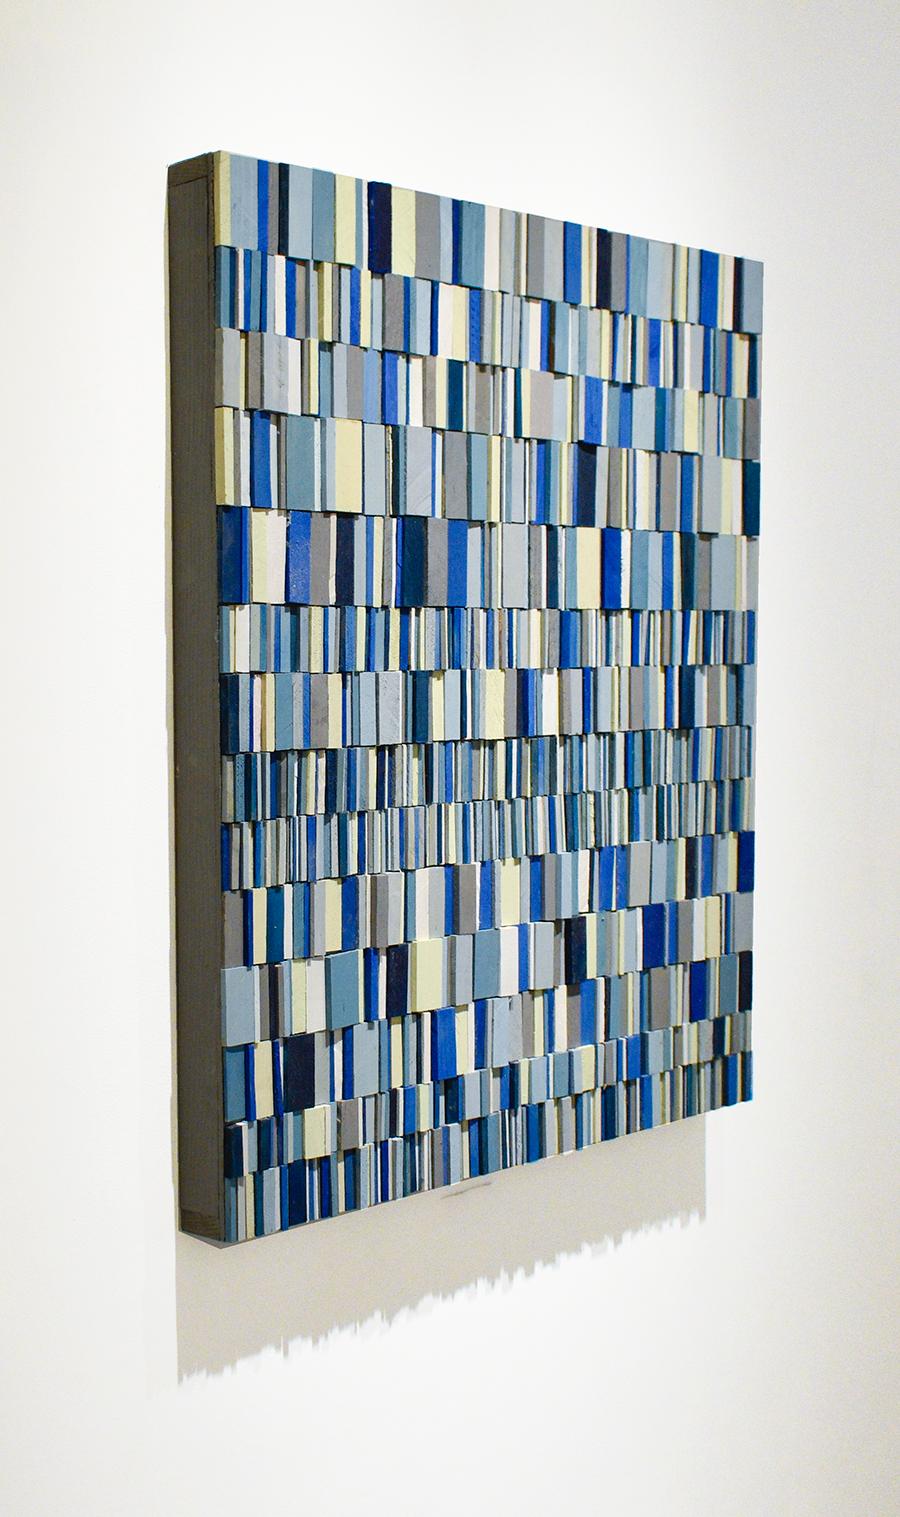 Syncopated Blues (Abstract Geometric Wall Sculpture in Blue, Black, White) - Brown Abstract Sculpture by Stephen Walling